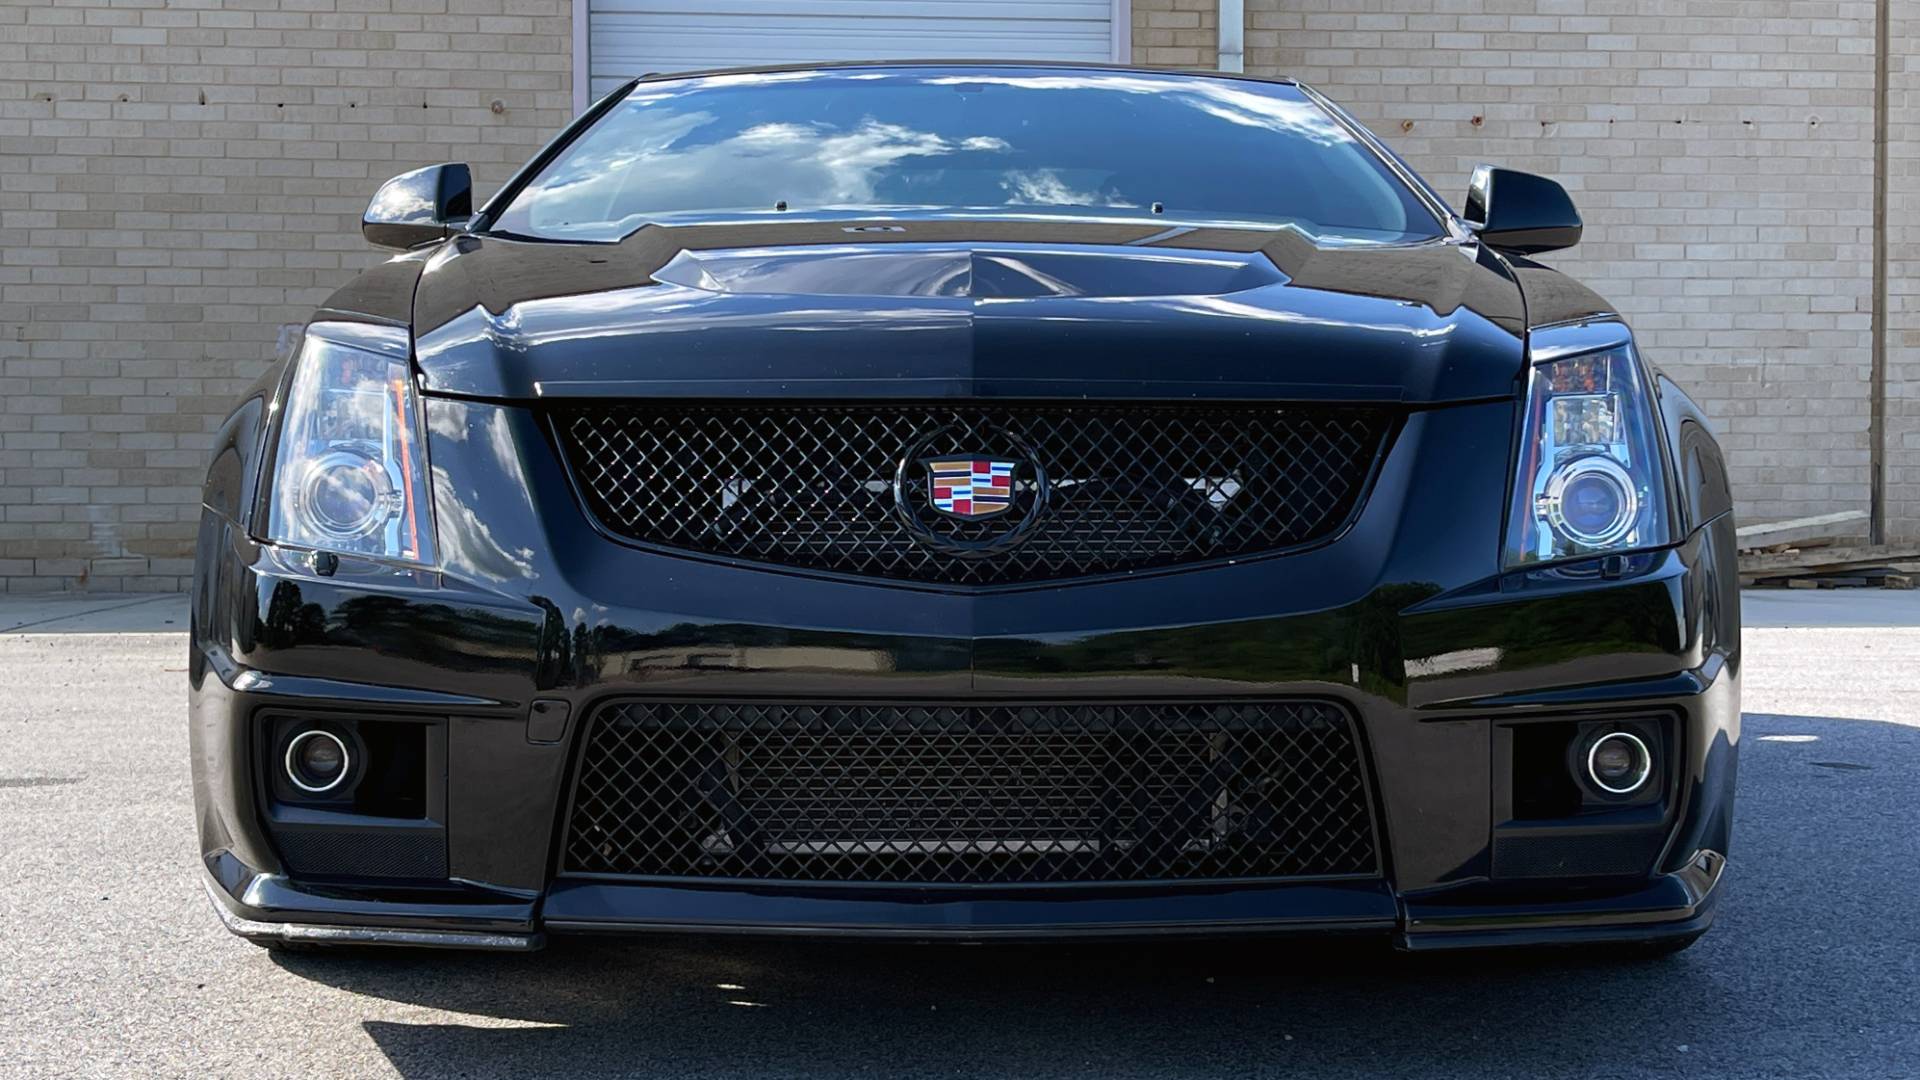 Used 2011 Cadillac CTS-V COUPE 6.2L 600HP+ / NAV / BOSE / SUNROOF / RECARO / 19IN WHLS / REARVIEW for sale Sold at Formula Imports in Charlotte NC 28227 6